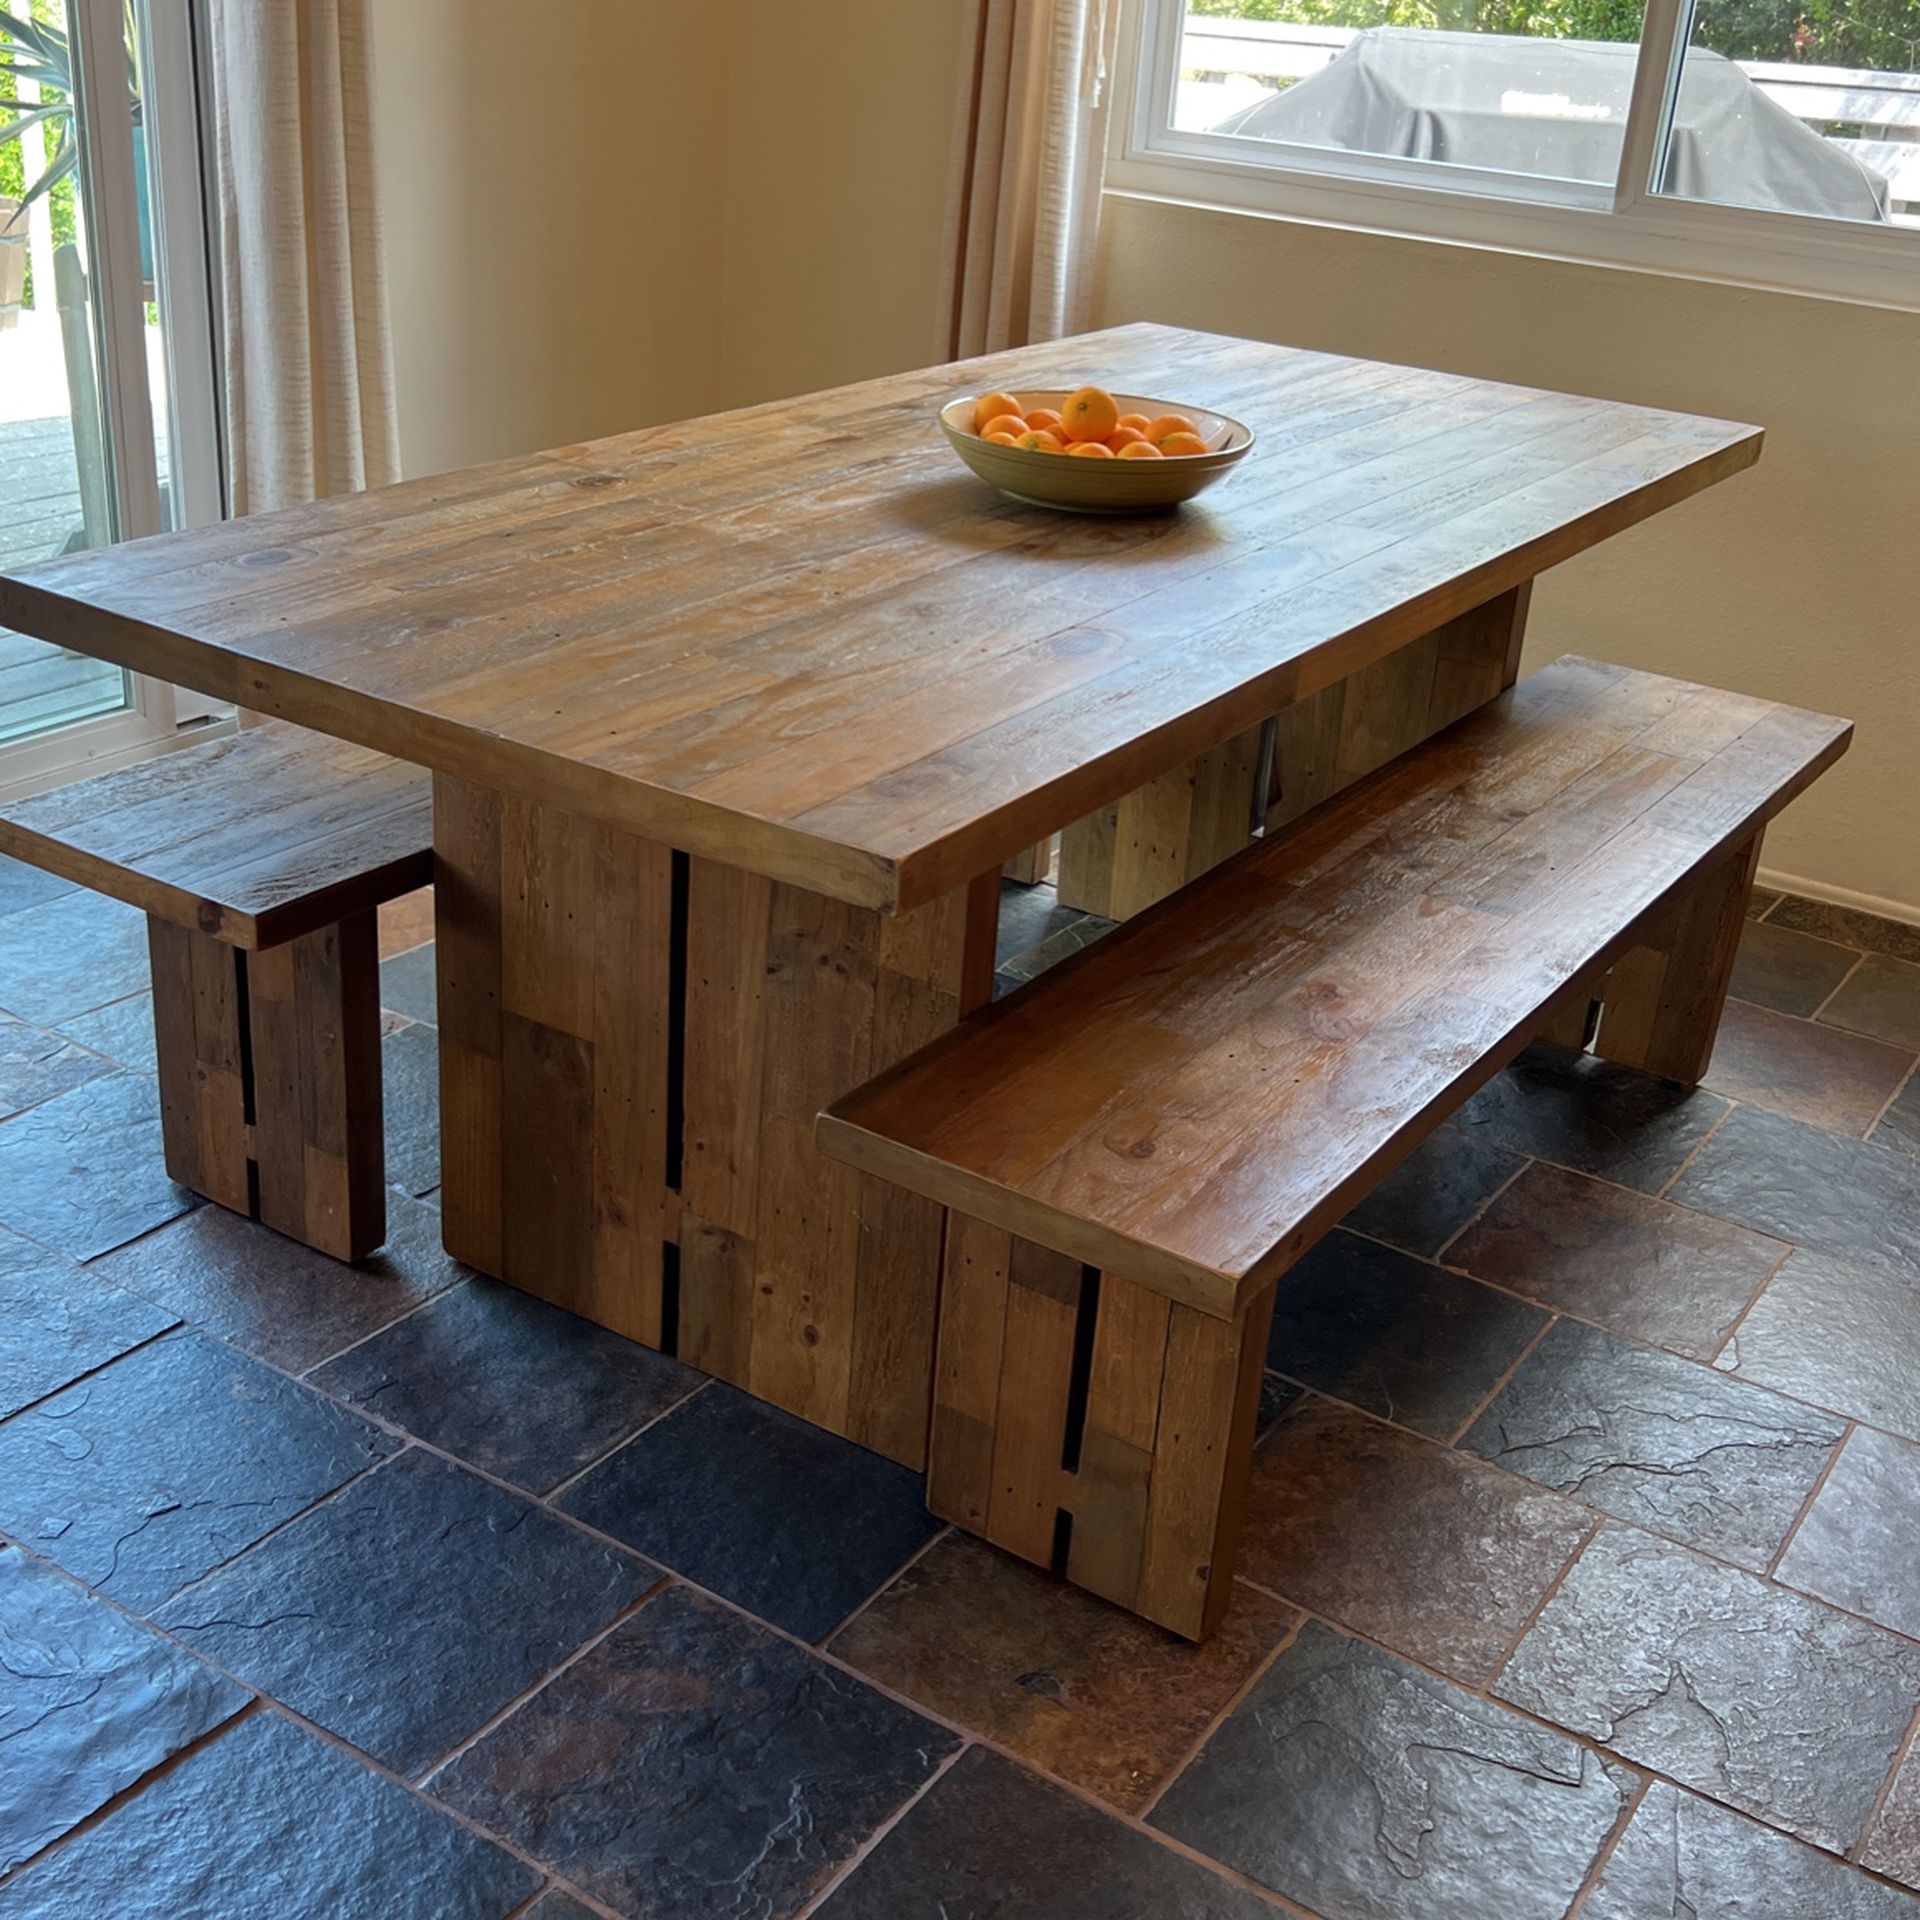 Rustic Dining Table With Two Benches